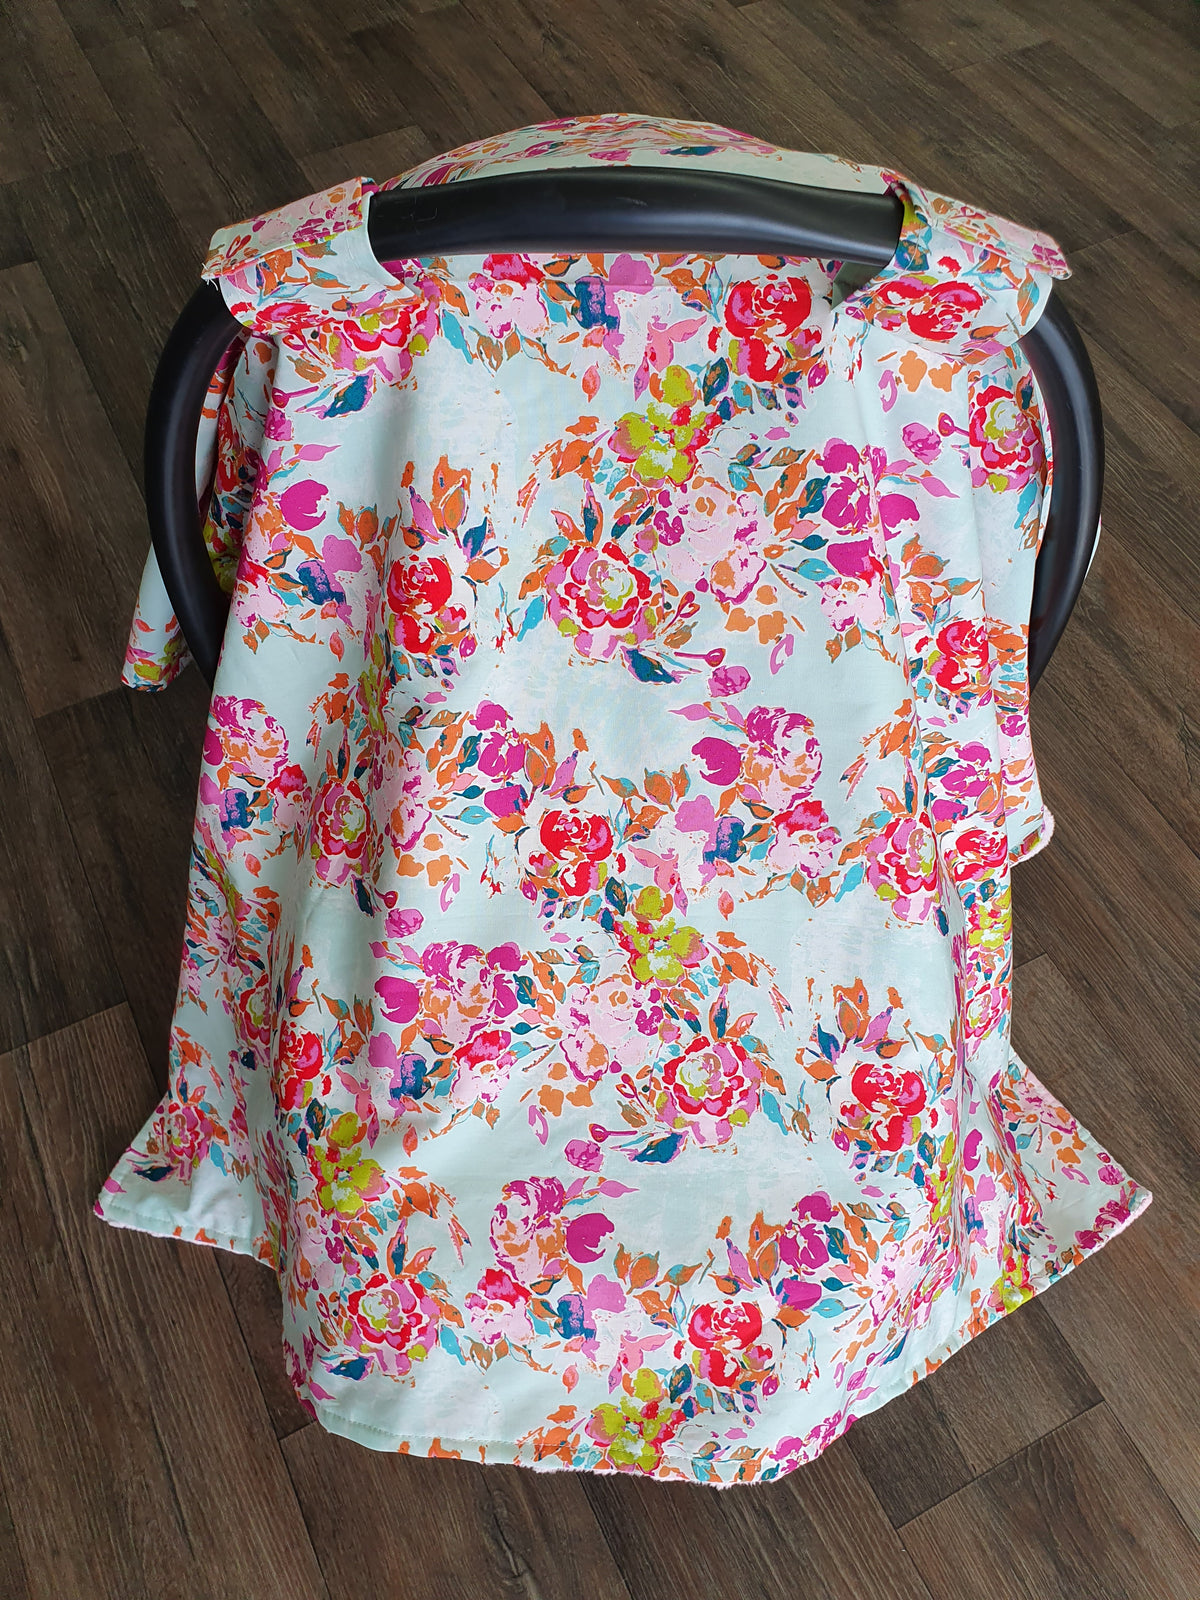 Carseat Tent - Floral in Summer Floral - DBC Baby Bedding Co 